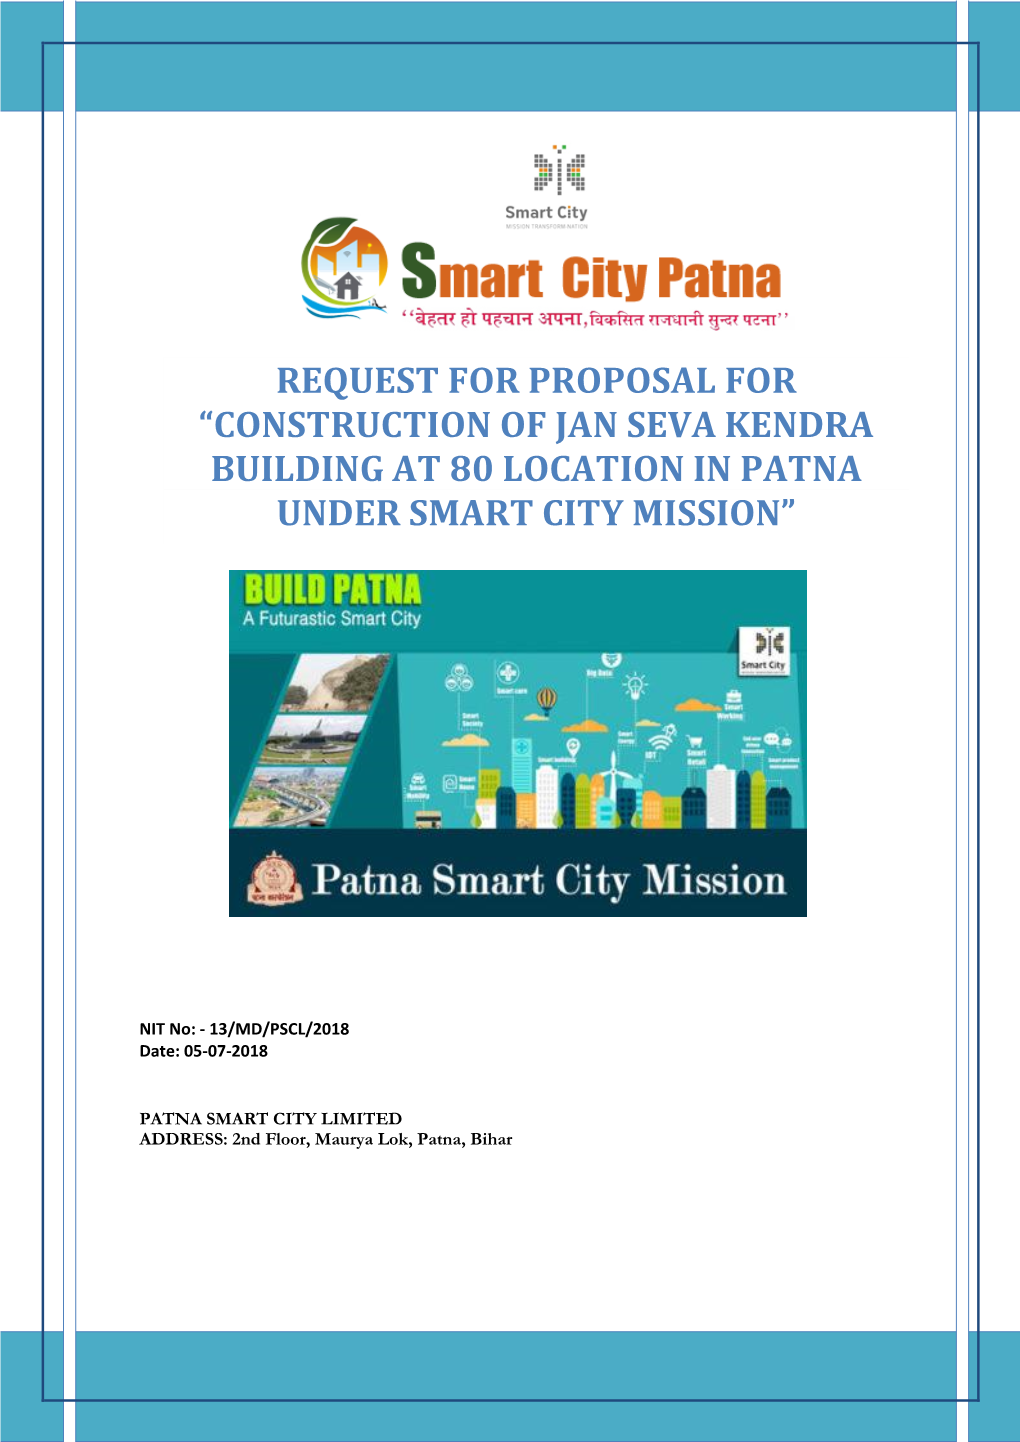 Request for Proposal for “Construction of Jan Seva Kendra Building at 80 Location in Patna Under Smart City Mission”